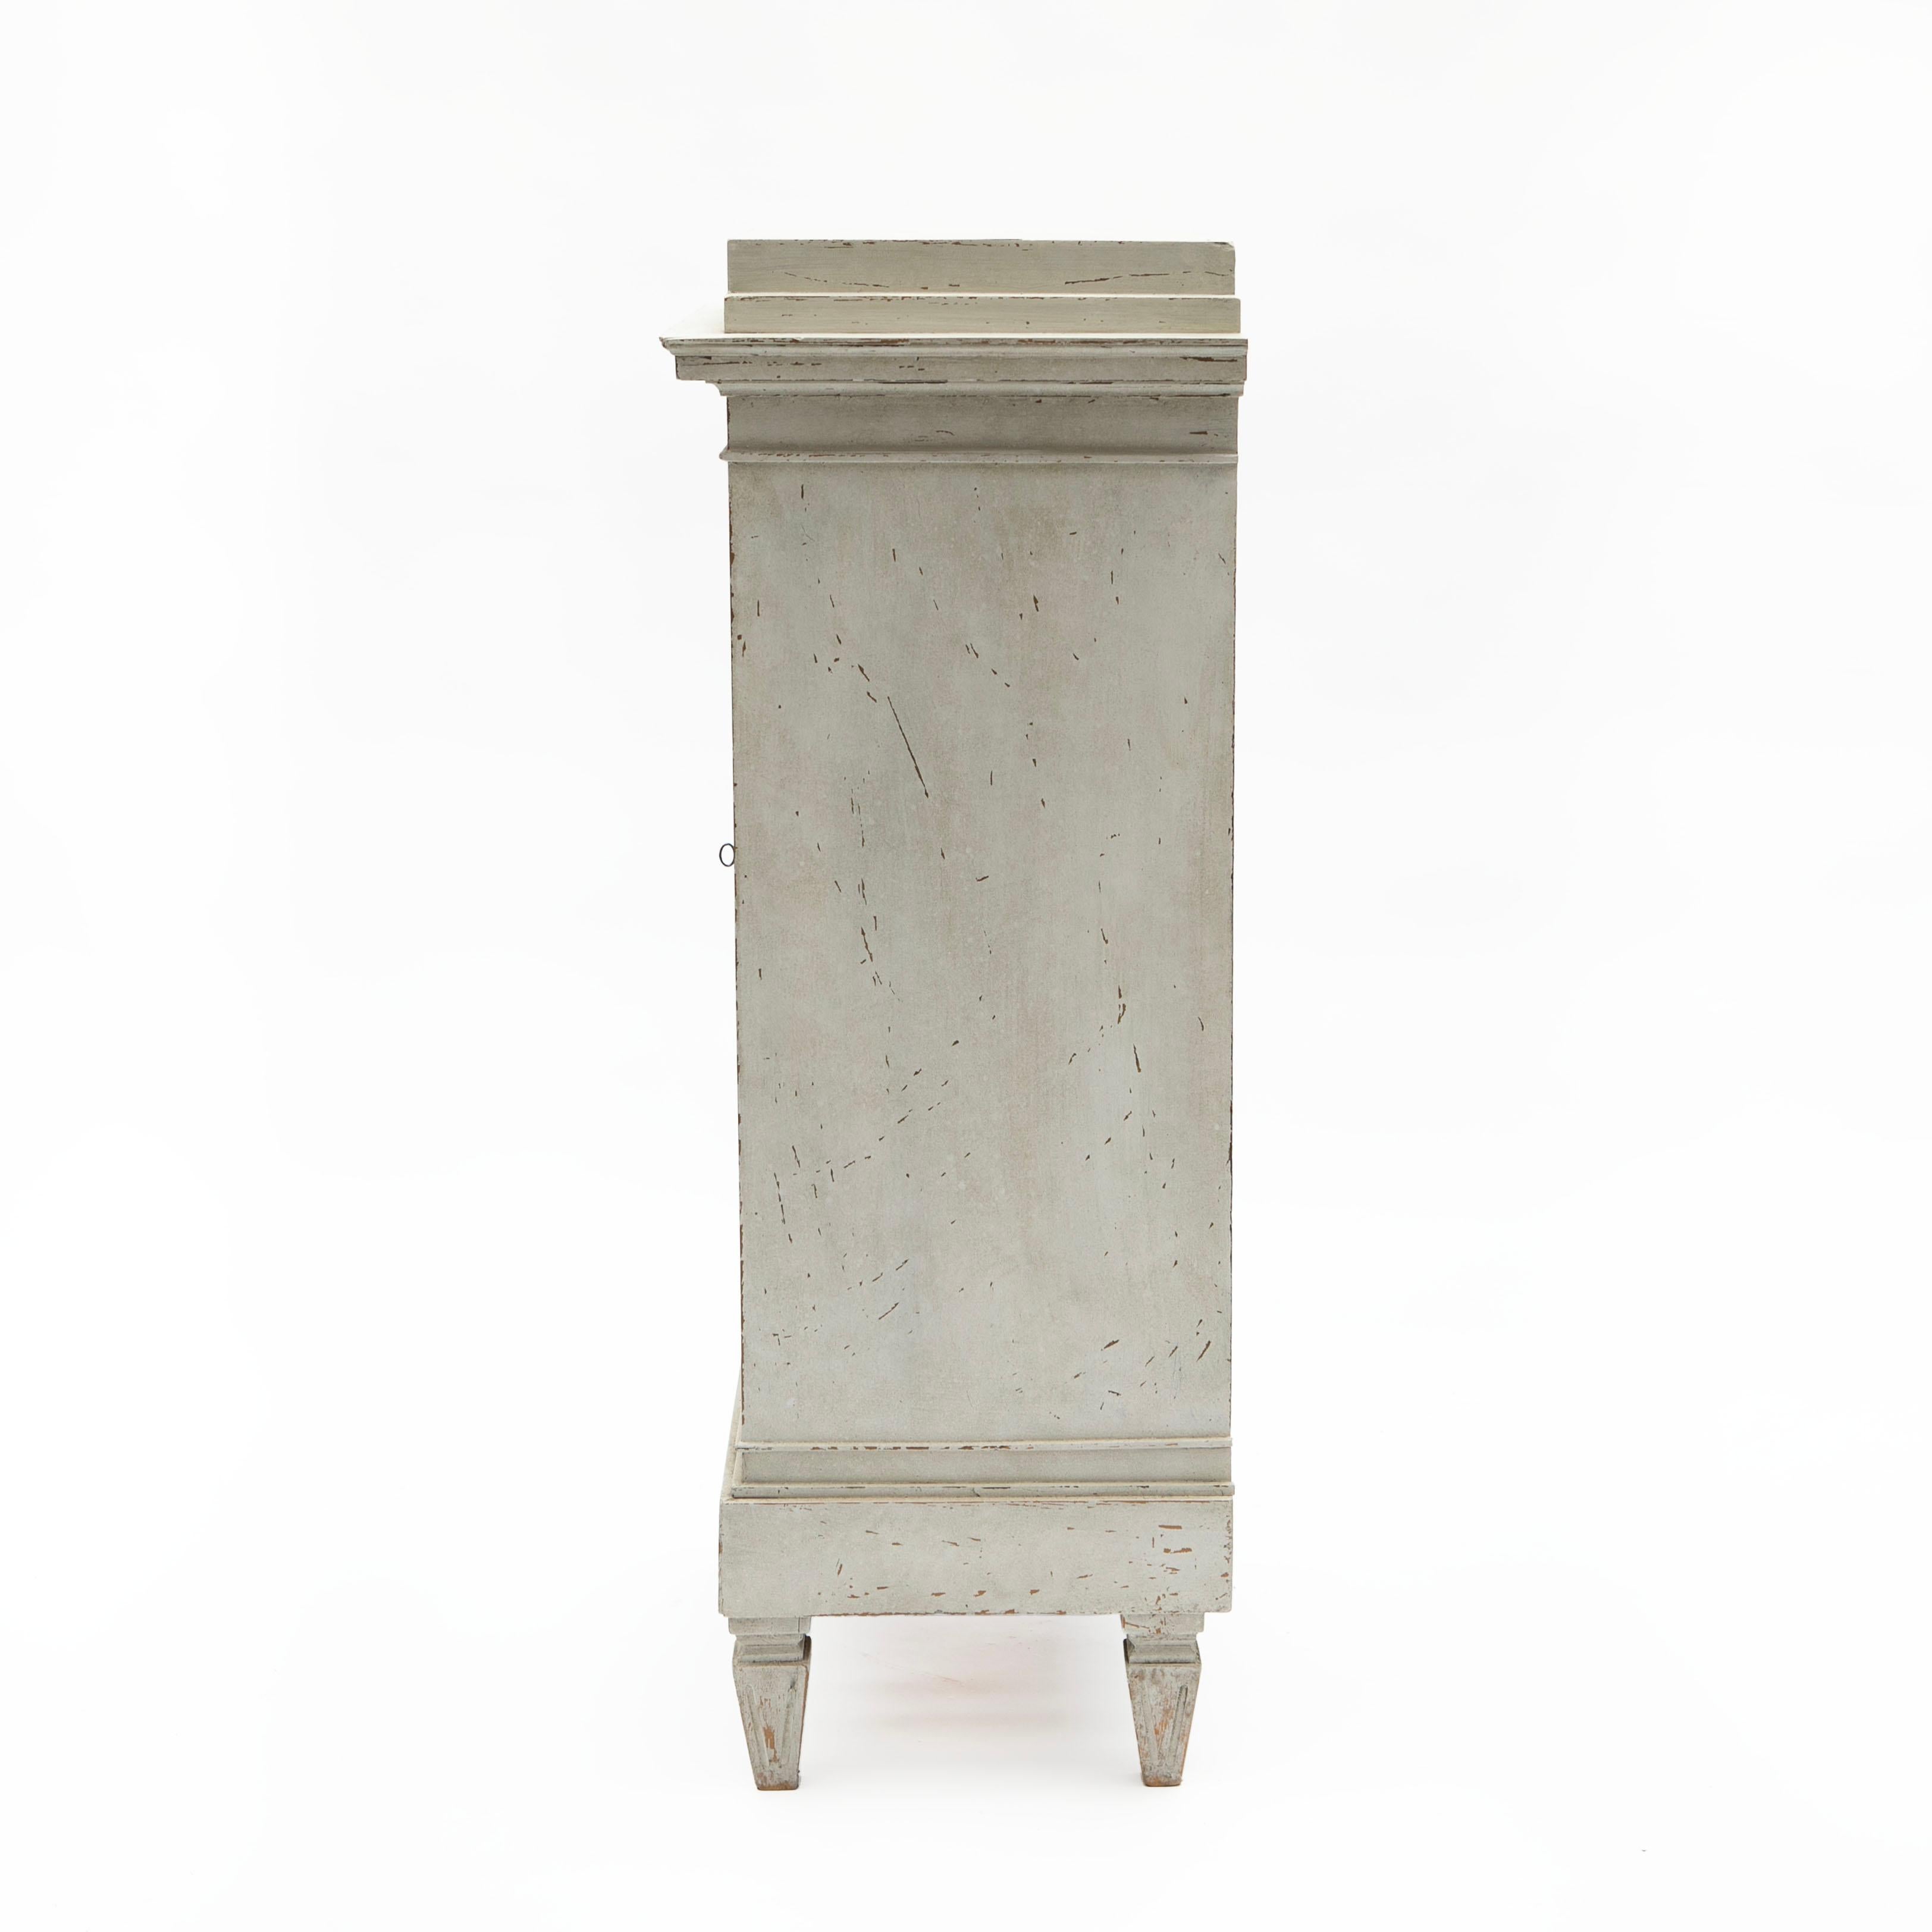 Louis XVI pedestal cabinet in a beautiful gray color.
Features a door with a wooden-carved sun in the center flanked by flutings on each side. At the top, there's a wooden-carved Vitruvian scroll also known as 'running dog' pattern. Resting on four